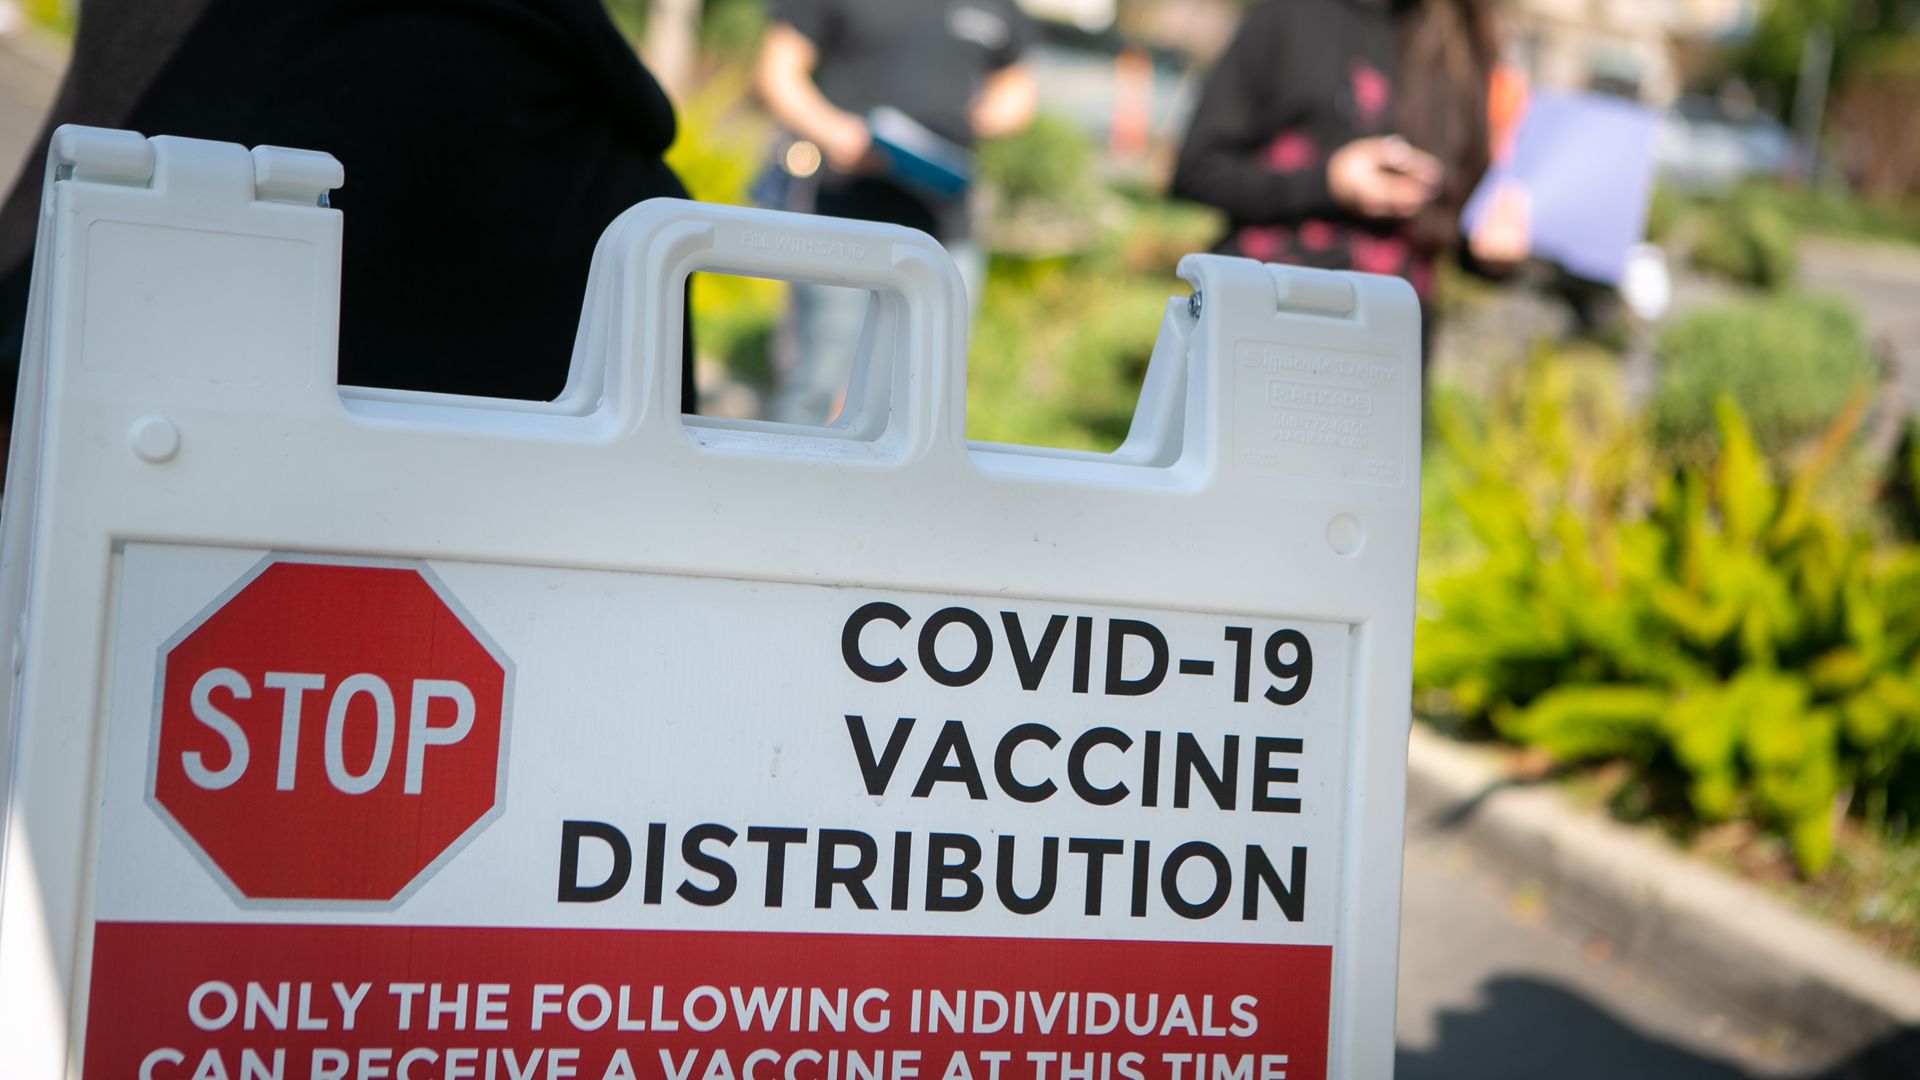 A COVID-19 vaccination site in Los Angeles last week. Photo: Jason Armond / Los Angeles Times via Getty Images